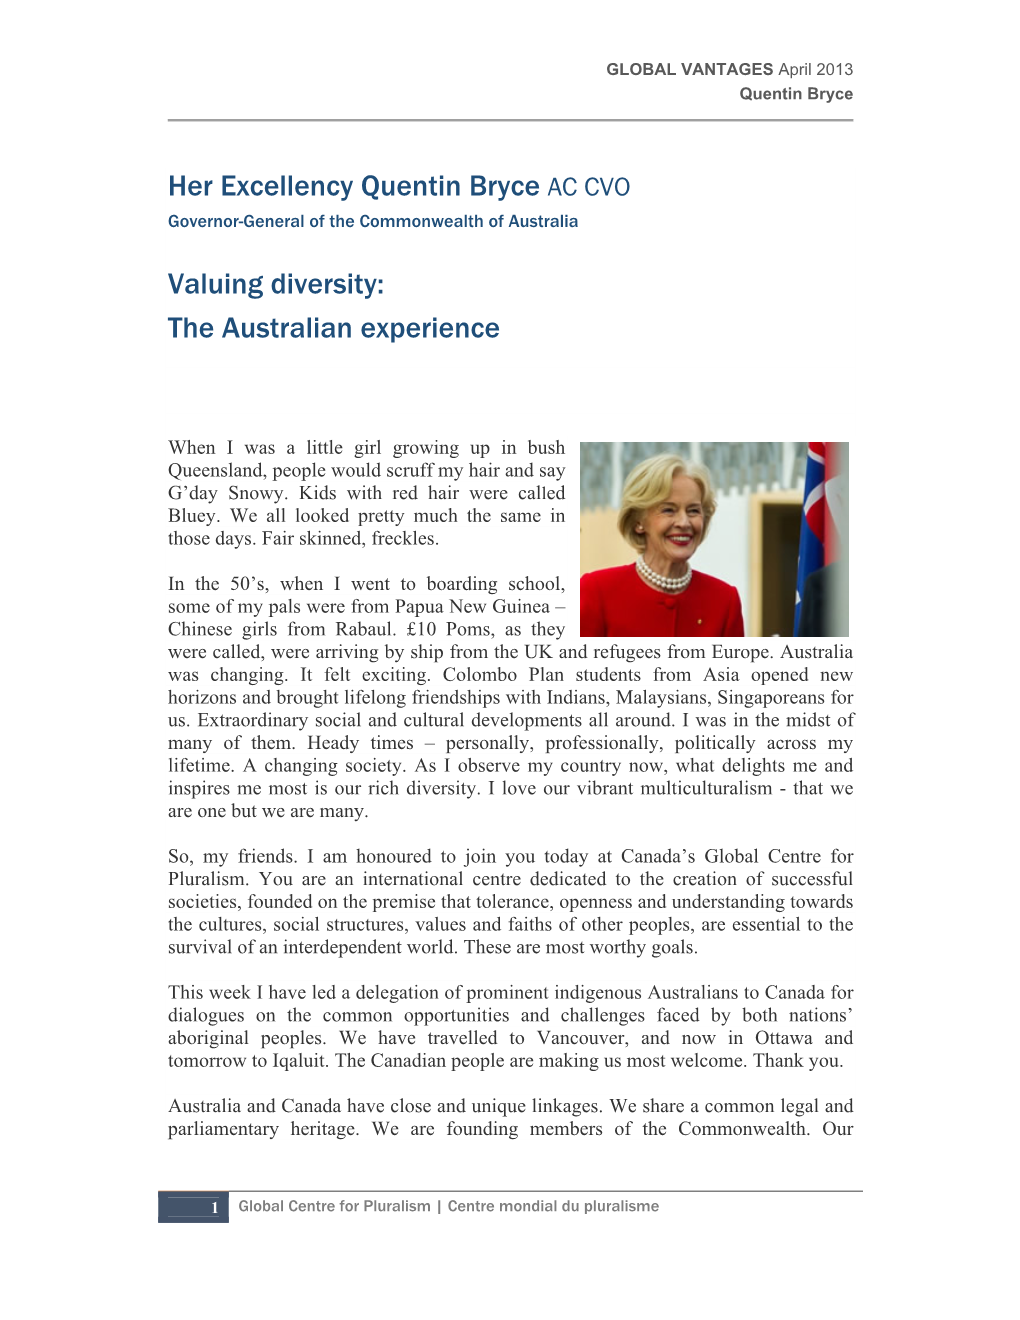 Her Excellency Quentin Bryce AC CVO Governor-General of the Commonwealth of Australia